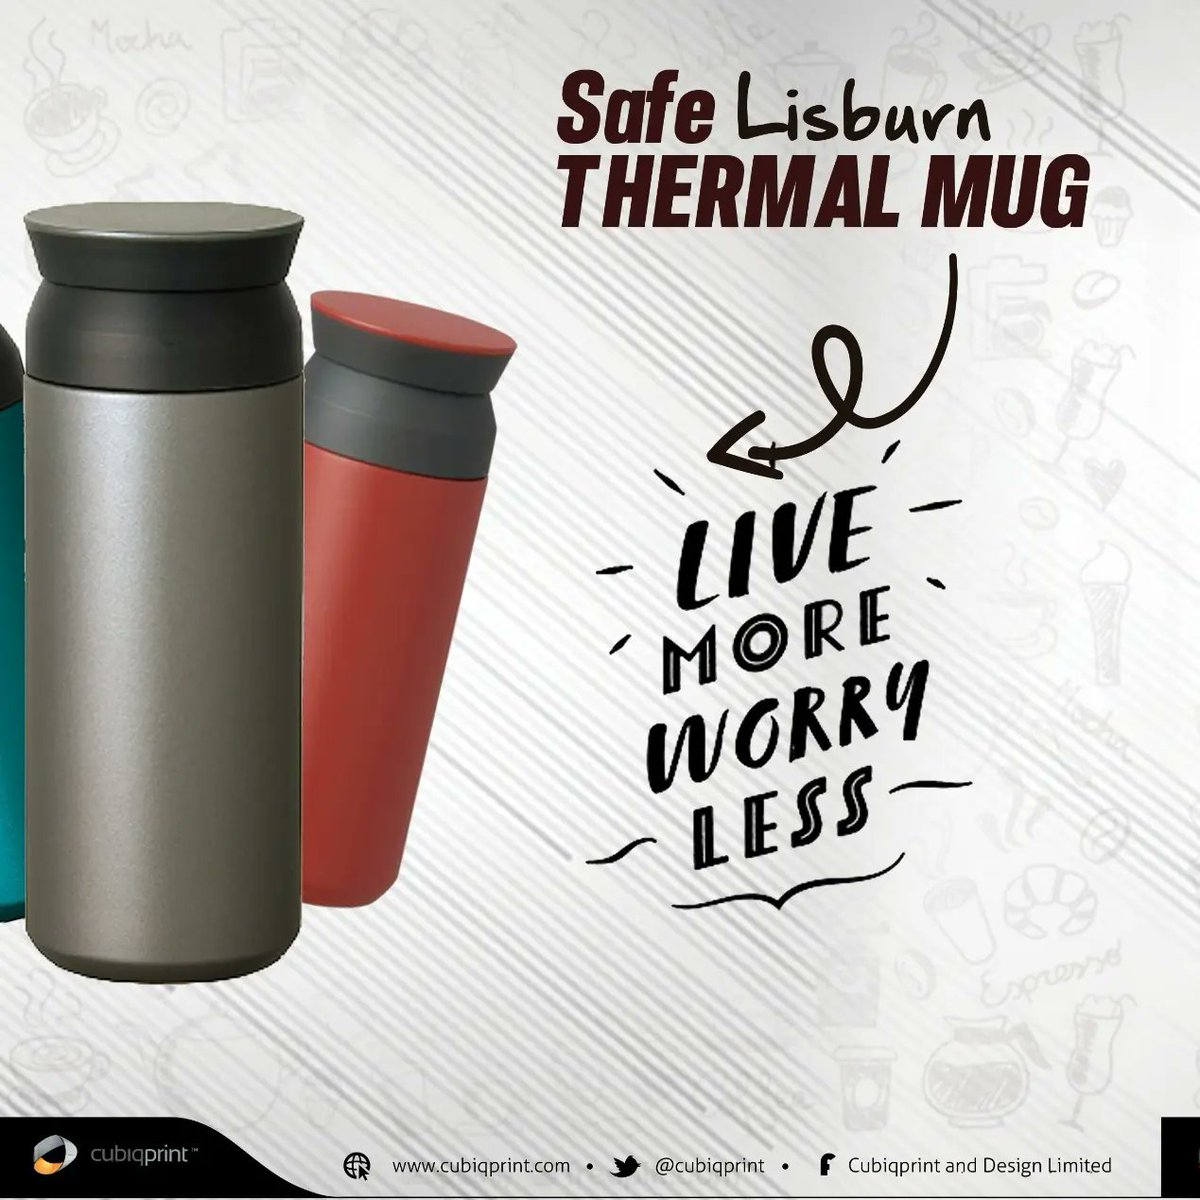 Make those morning coffee runs a breeze by getting any these #Thermalmugs from our extensive selection

Call us on 0204400188 or email info@cubiqprint.com to order

#thermalinsulation #thermalmugs #promotionalitems #promotionalproducts #cubiqpromo #thermalflasks #promotionalgifts